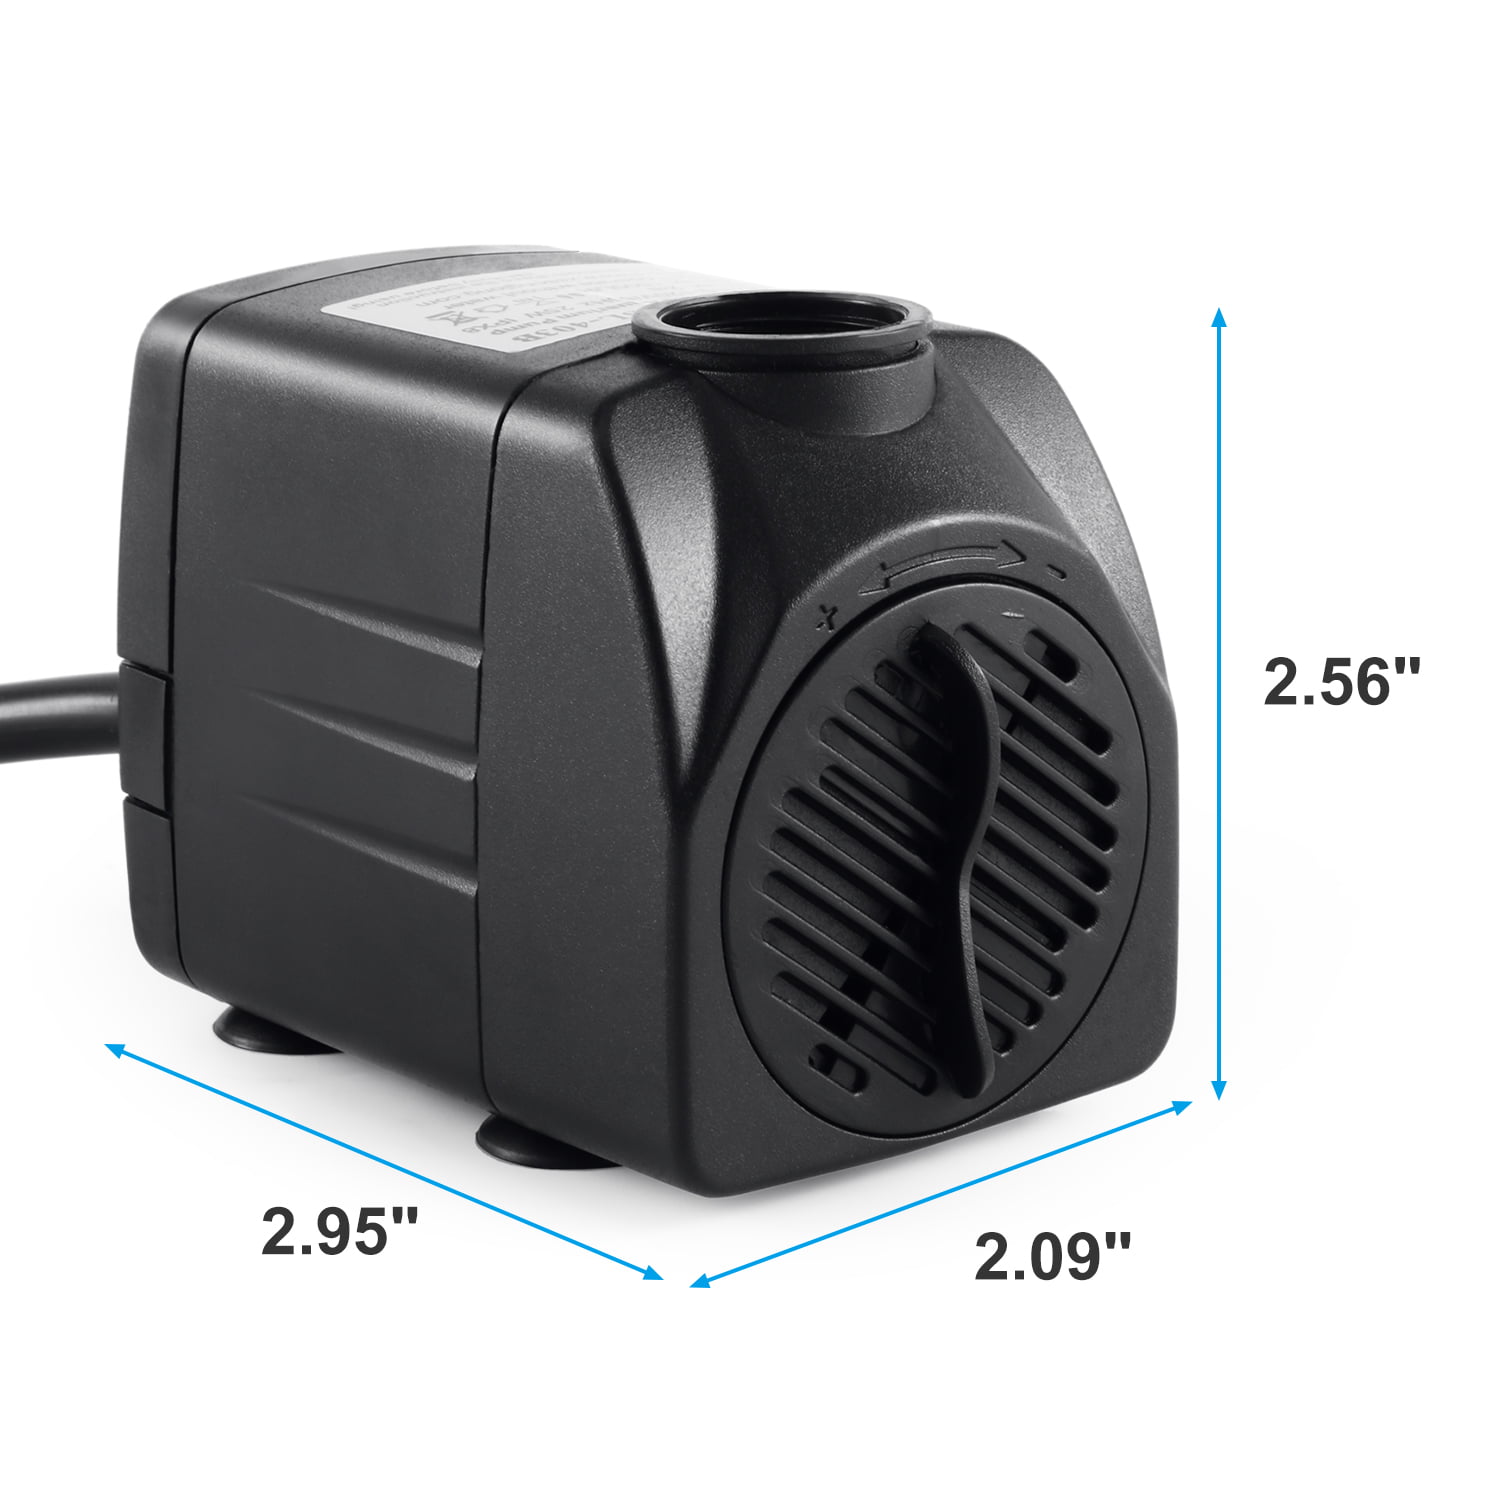 Pond Durable 25W Outdoor Fountain Water Pump with 5.9 feet Power Cord and 2 Nozzles Aquarium Submersible Water Pump 400GPH Fish Tank Hydroponics 